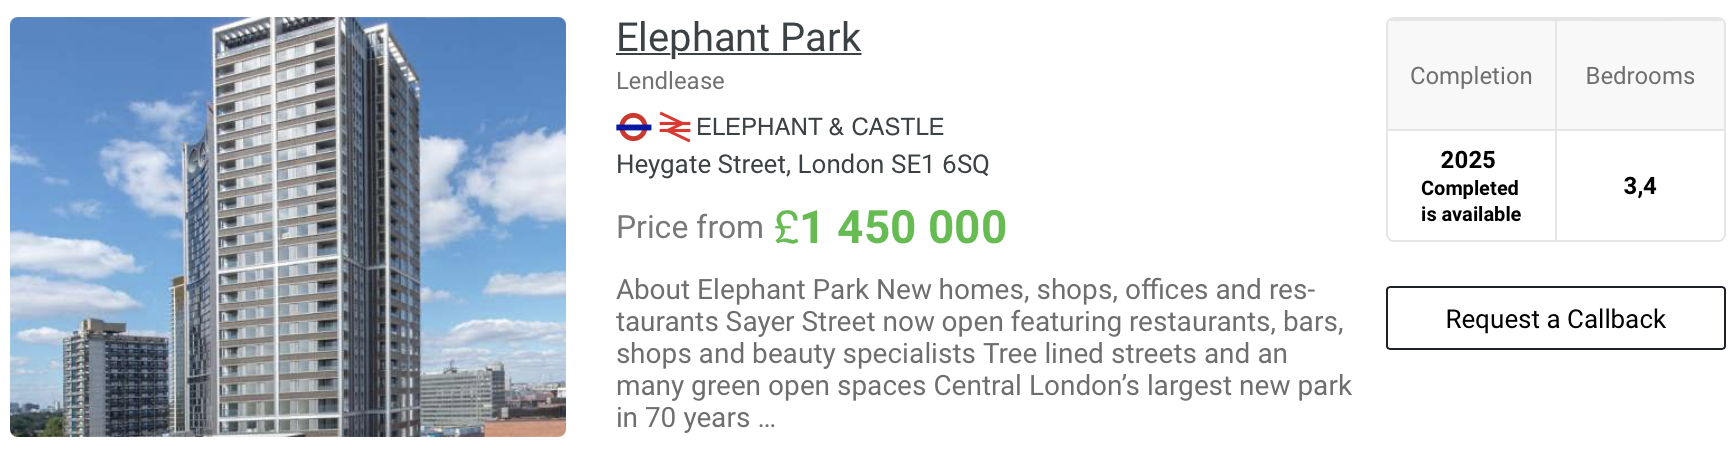 Elephant Park Is Almost Ready